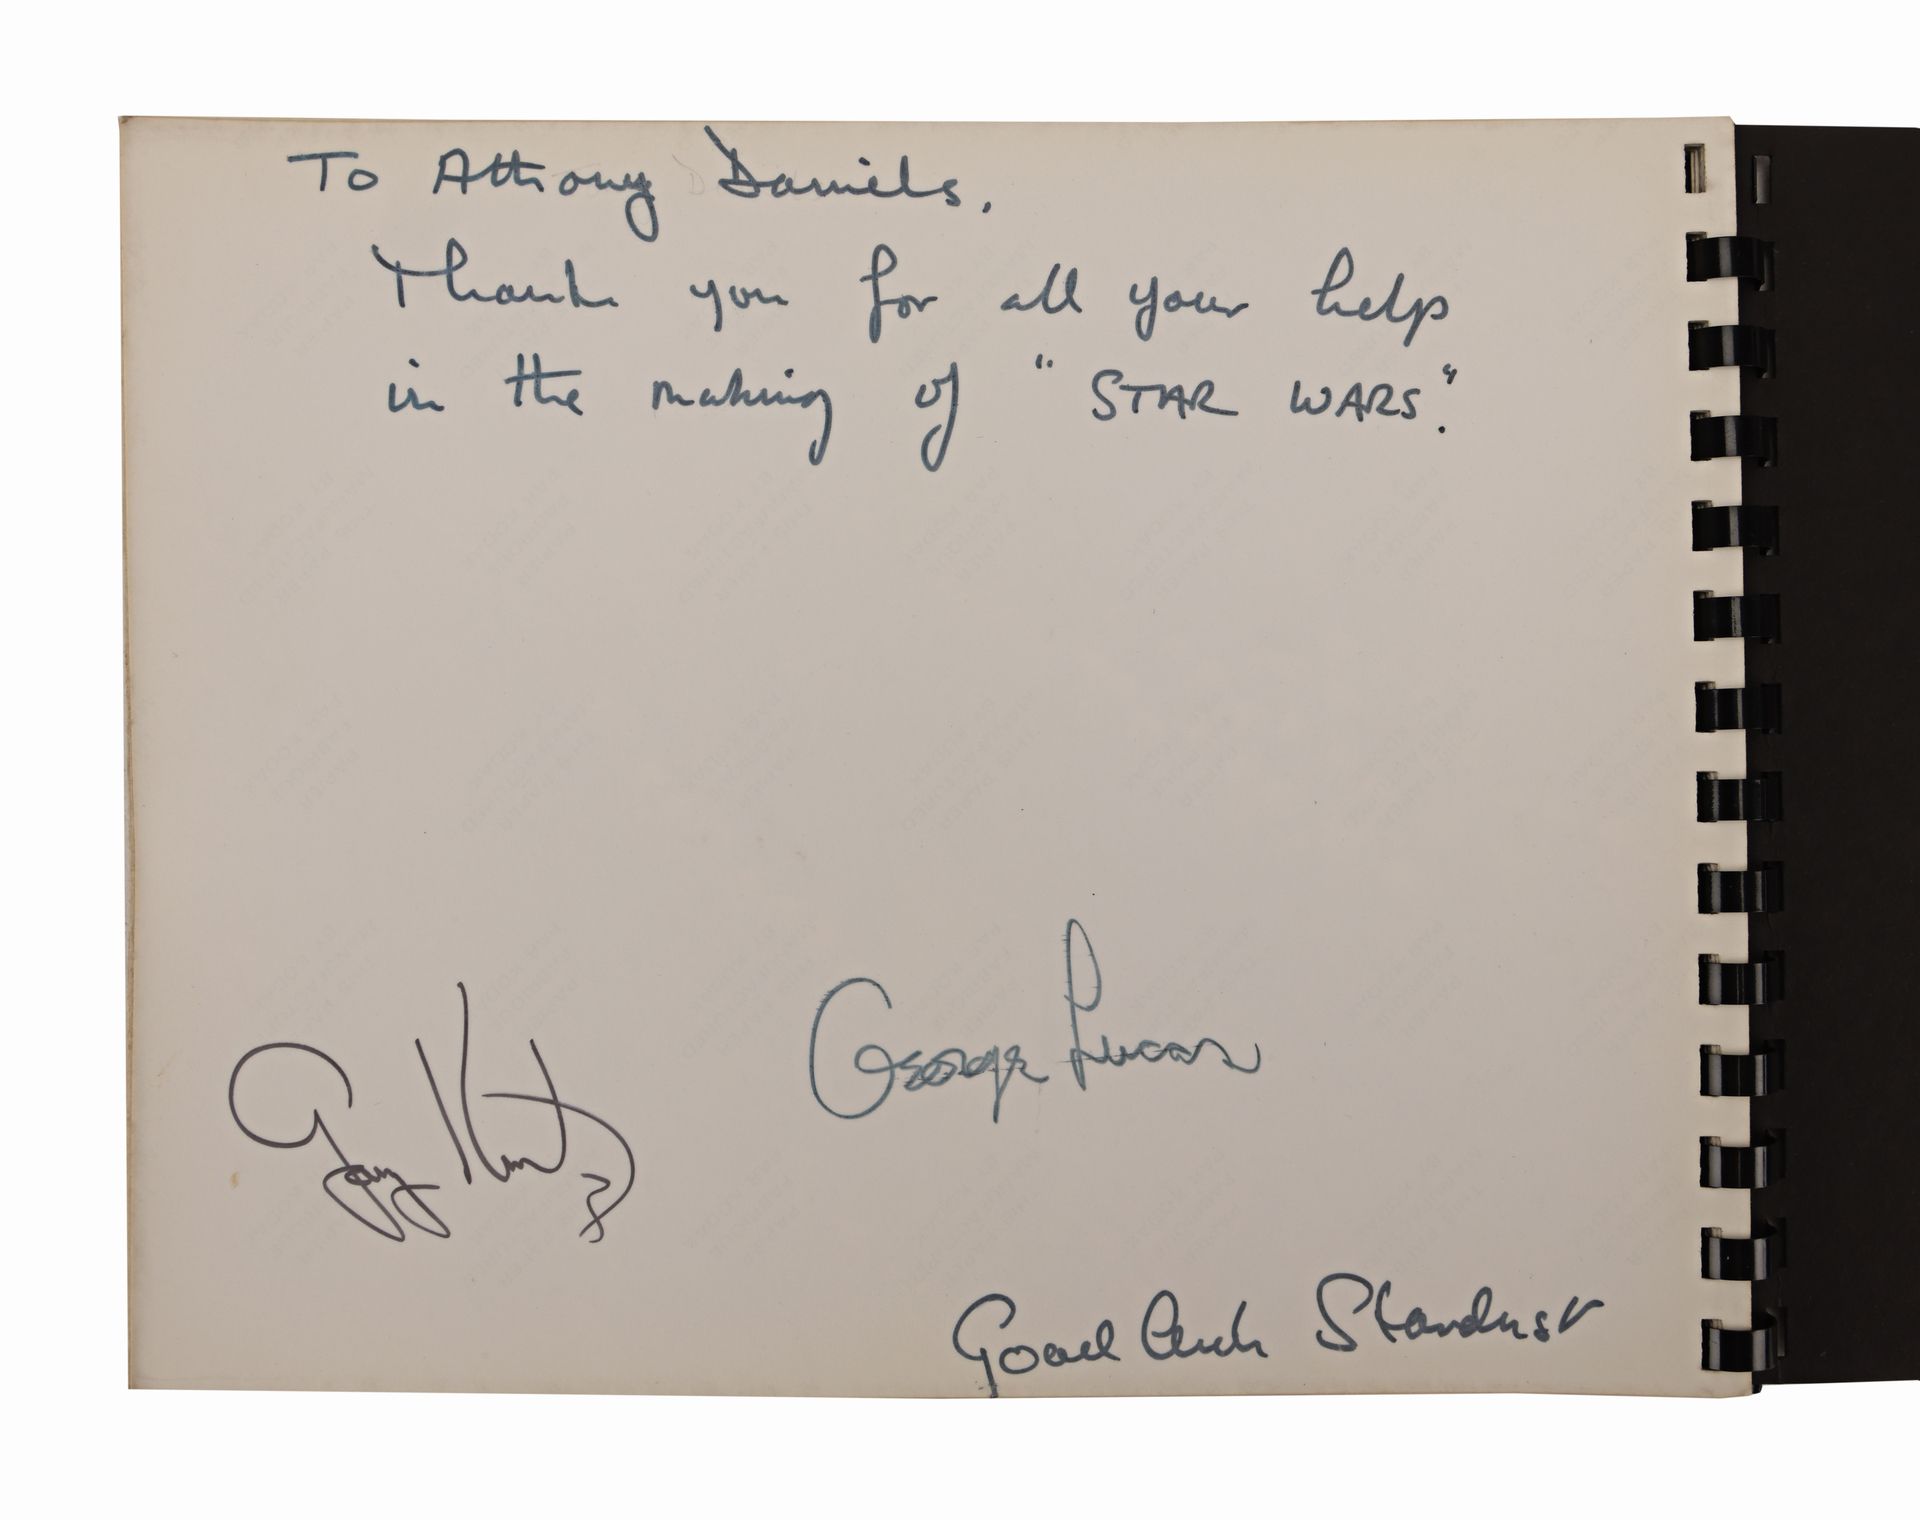 STAR WARS: A NEW HOPE (1977) - Anthony Daniels Collection: Glory Book Signed to Anthony Daniels from - Image 3 of 7